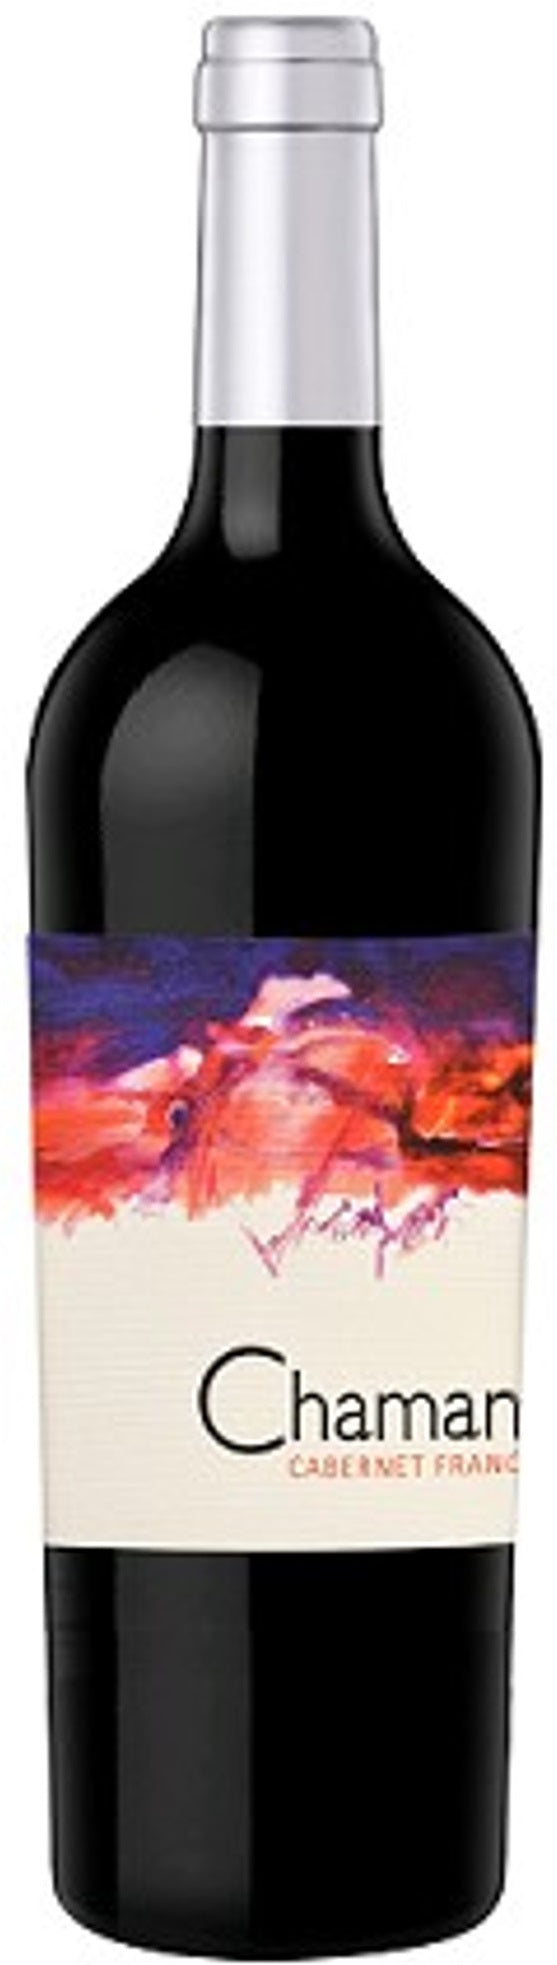 Chaman Cabernet Franc Uco Valley 2017